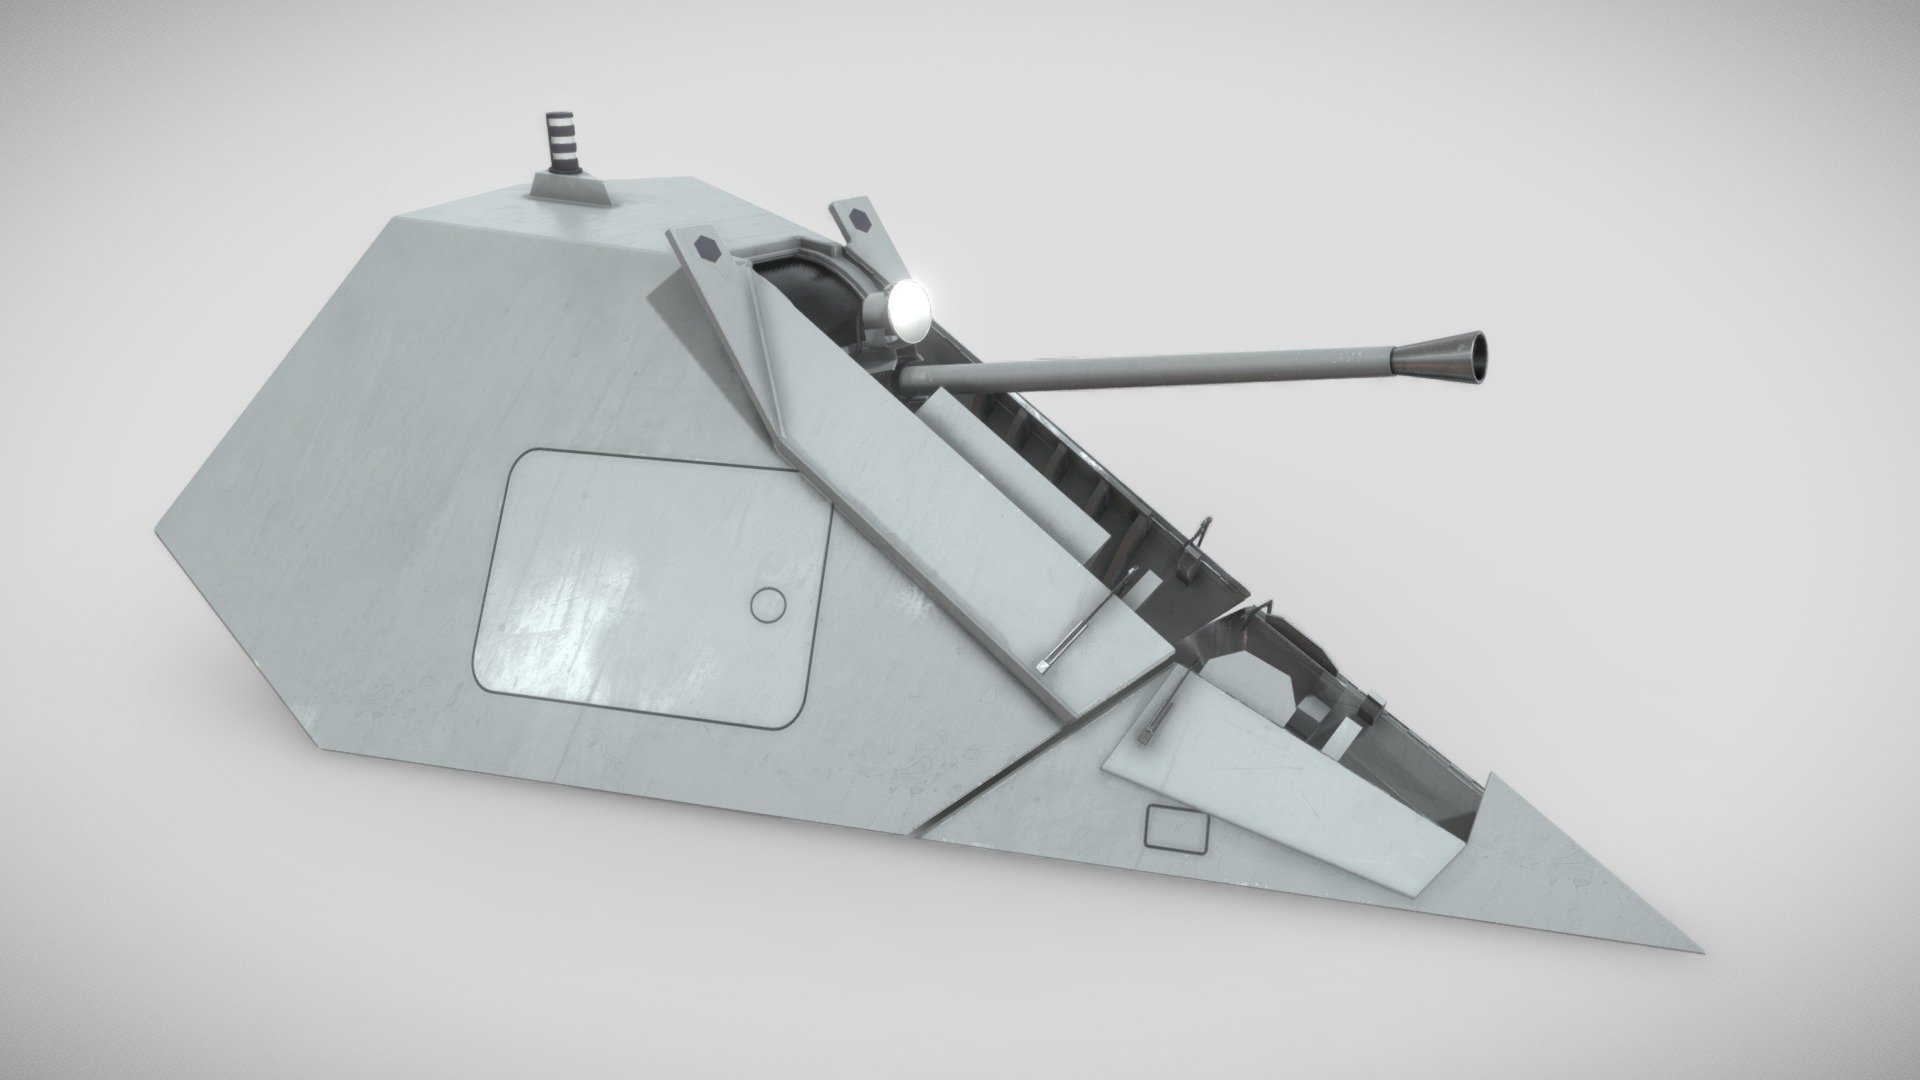 The Bofors 57 mm Naval Automatic is a series of dual-purpose naval guns.

This 3D model was created using 3ds Max, with textures designed in Substance Painter. The model has been meticulously unwrapped and divided into separate parts, enabling the base and turret to rotate seamlessly. If necessary, I am also capable of exporting the textures in various formats suitable for Unity, Unreal Engine, or V-Ray integration 3d model